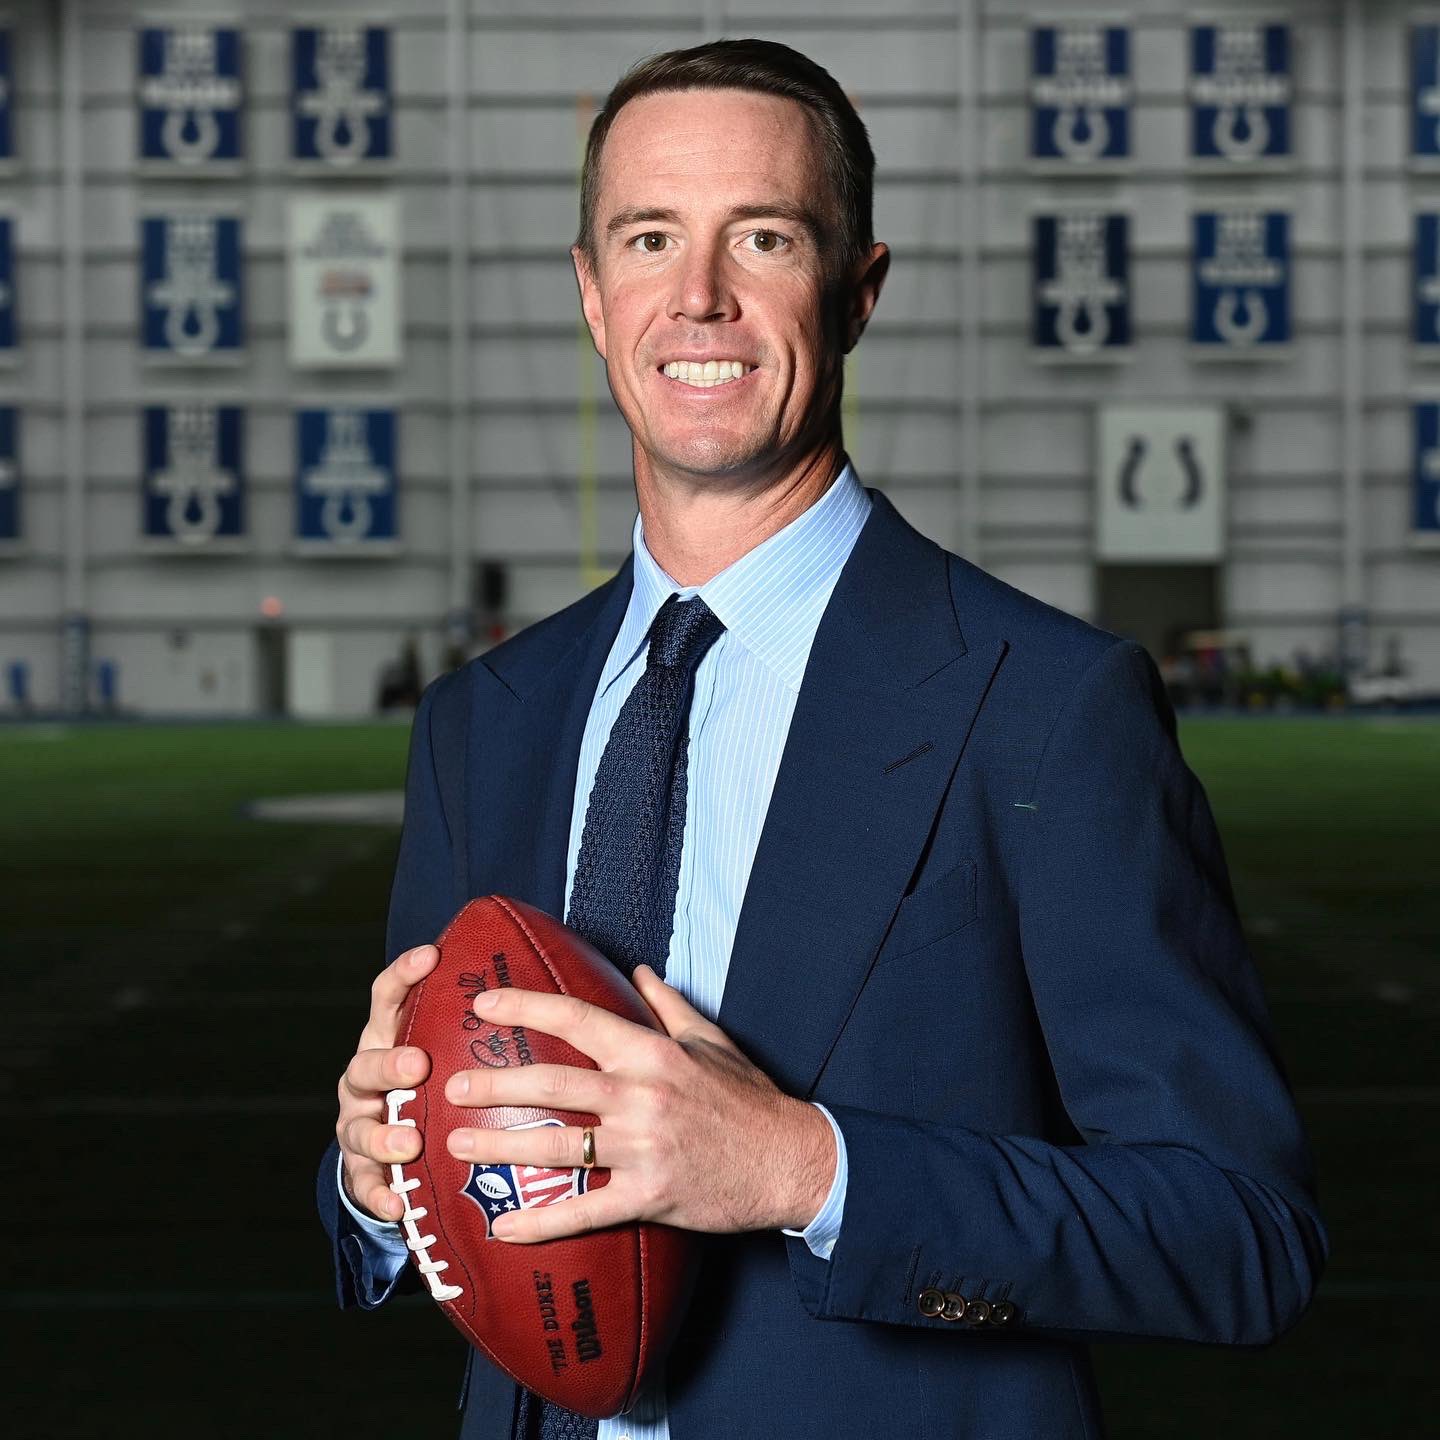 What Happened To Colts Quarterback Ryan: Does He Have Any Health Issue? Facts About Matt Ryan That Nobody Knows